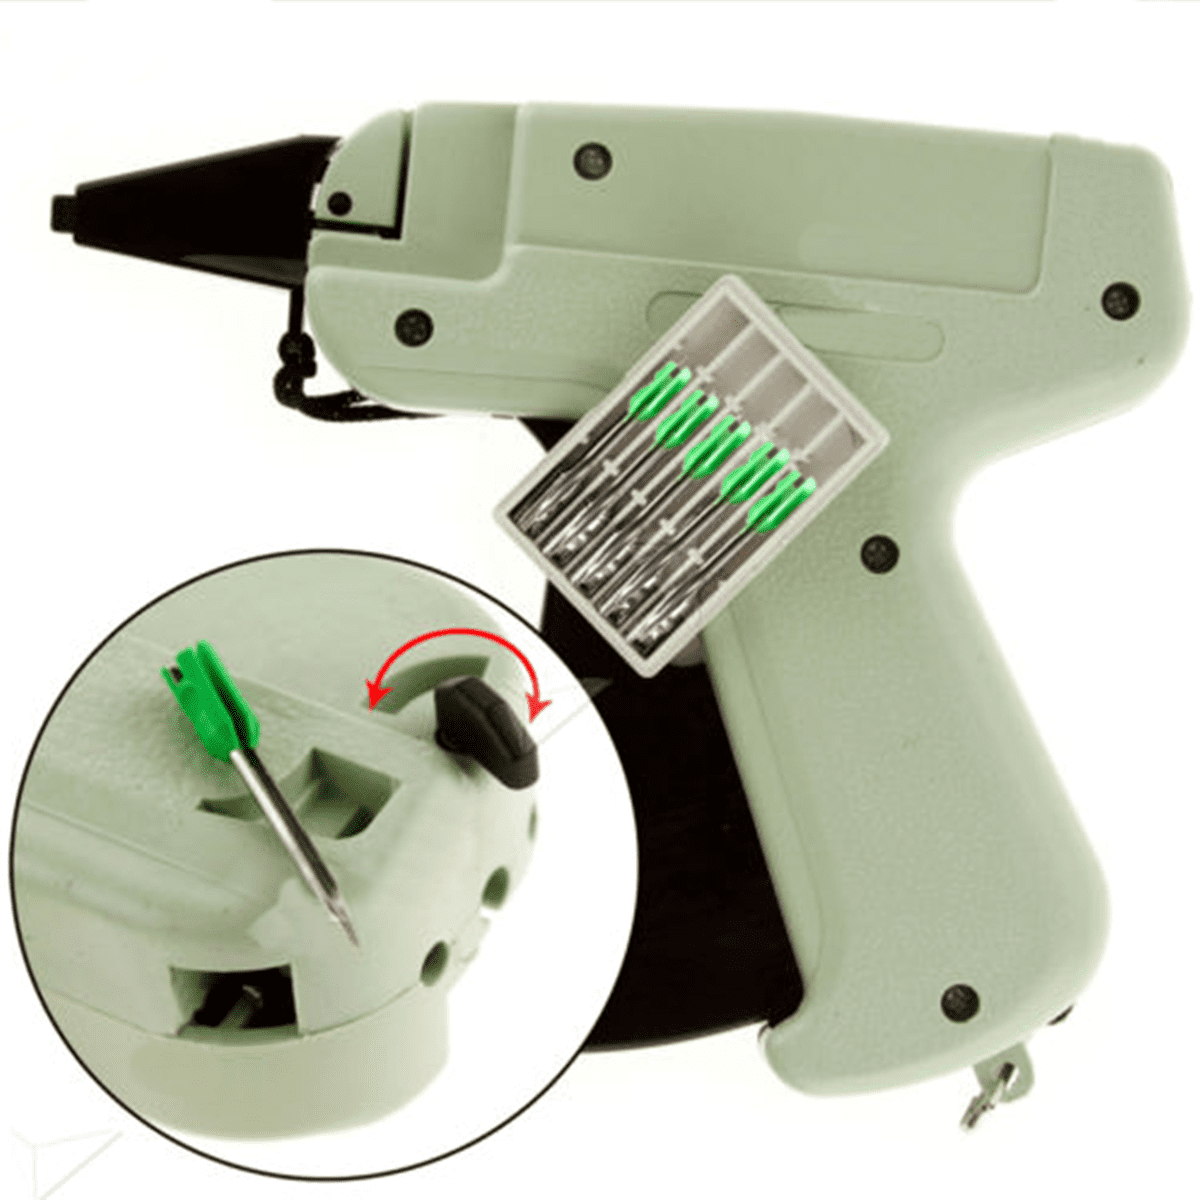 Details about   Clothing Garment Price Label Tagging Tag Gun Needle Machine Tag Trademark GHHH 